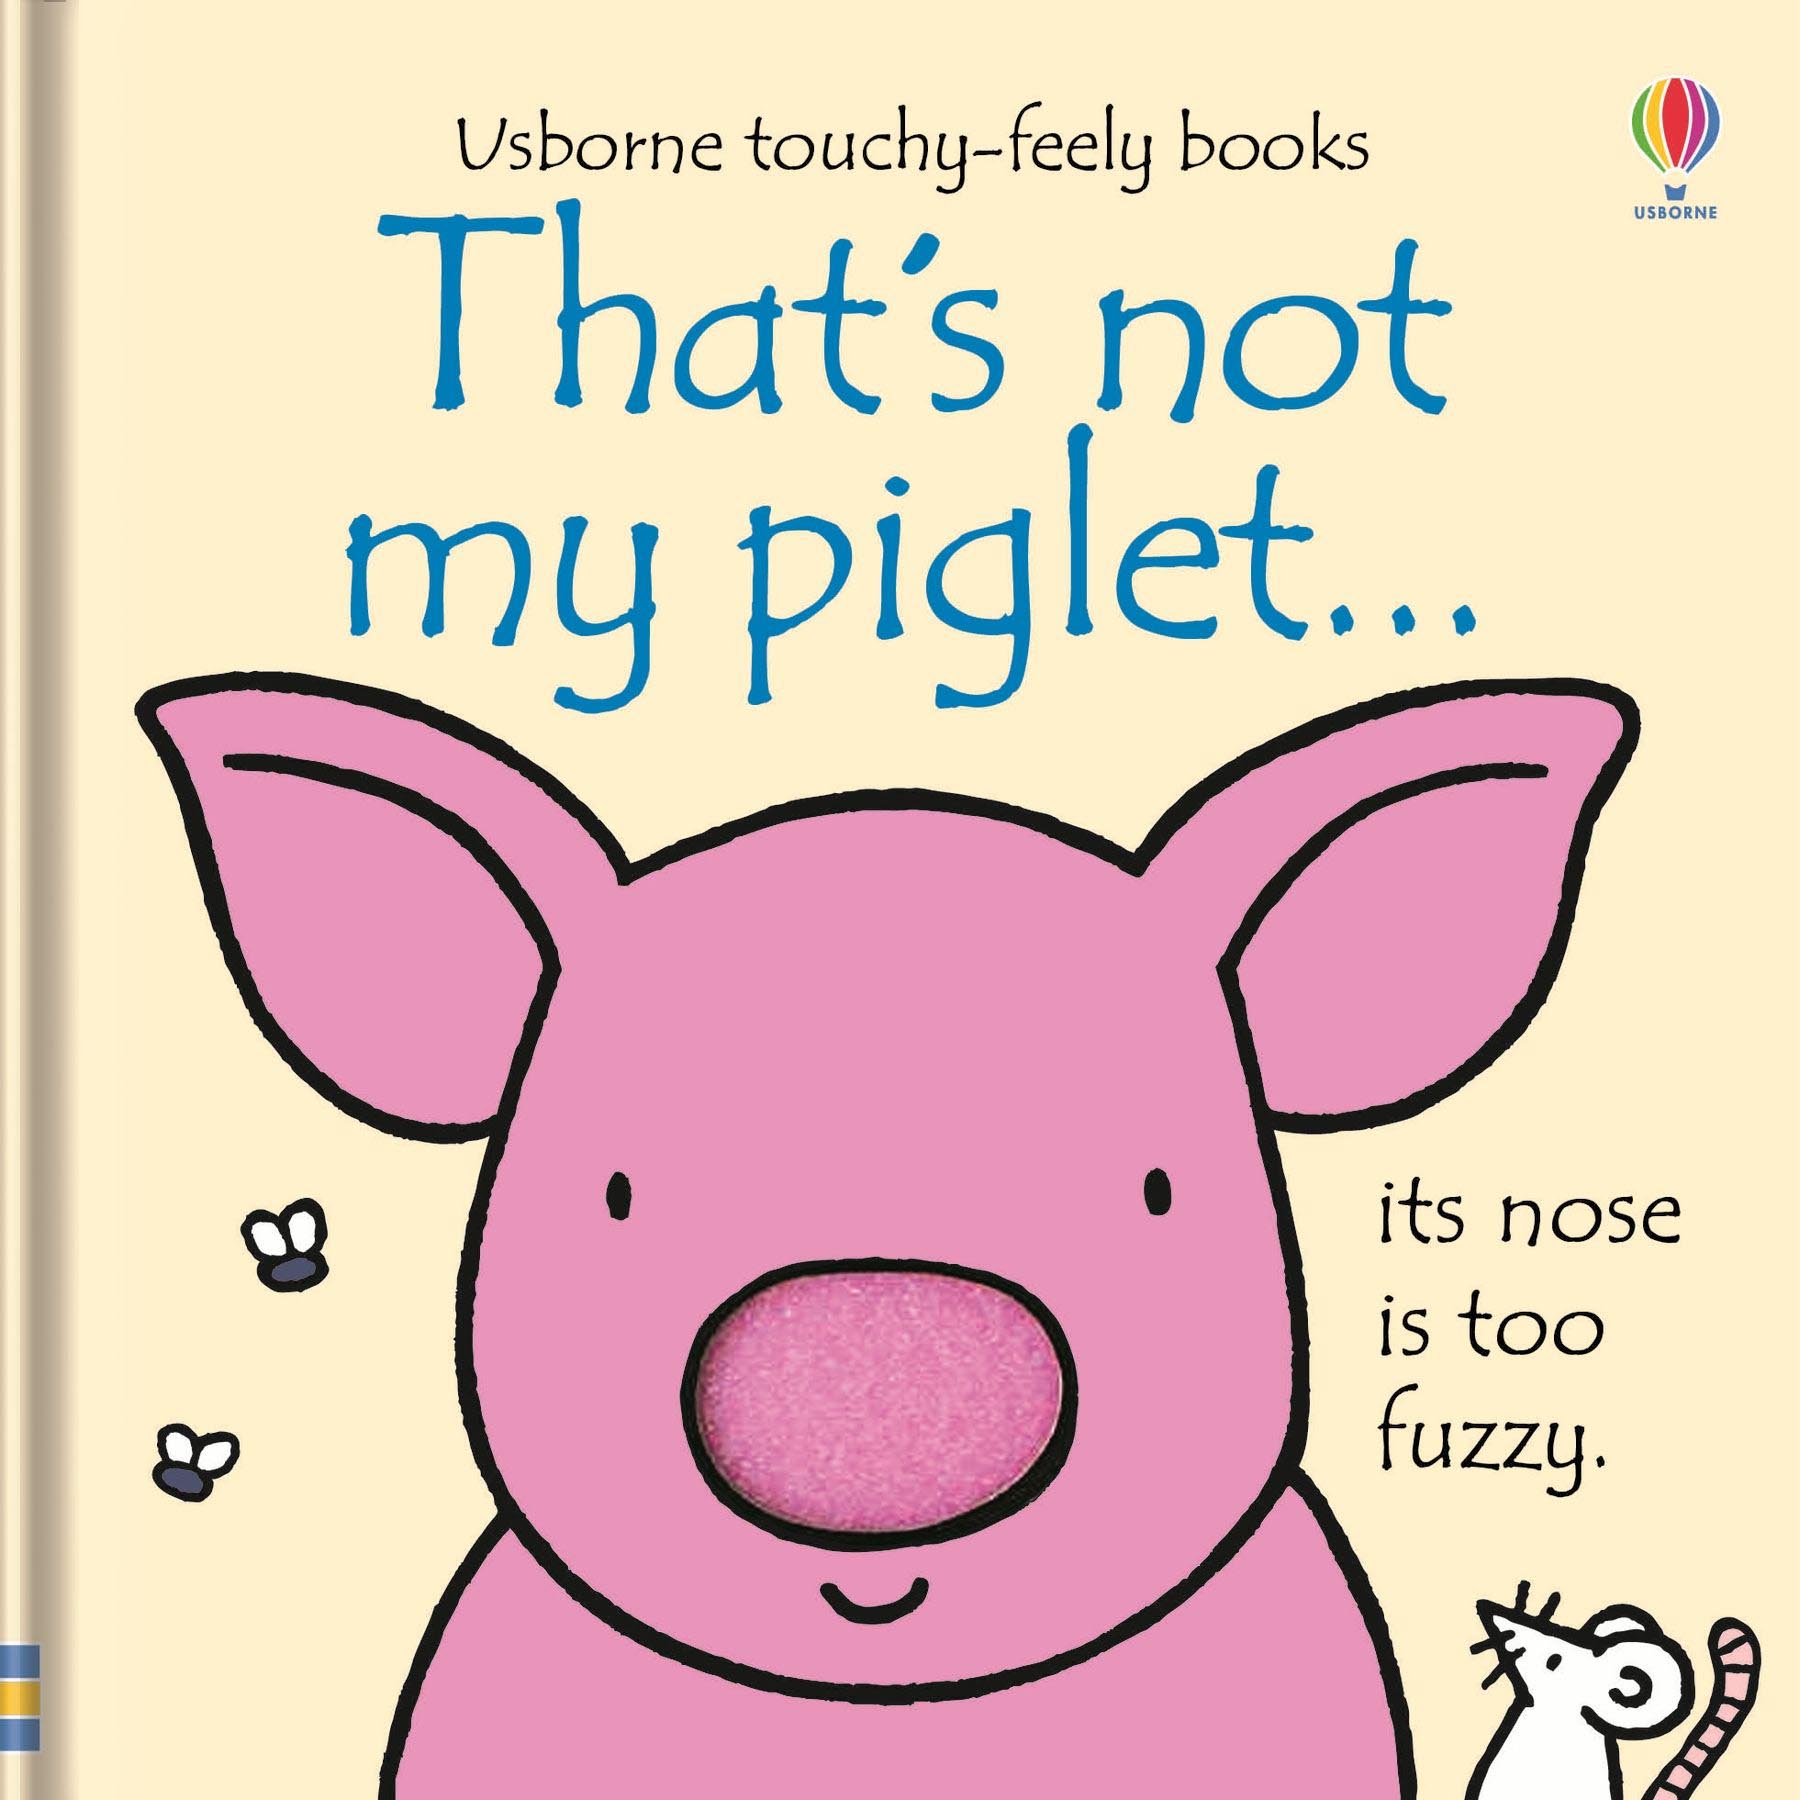 Usborne Touchy Feely Books Thats not my piglet